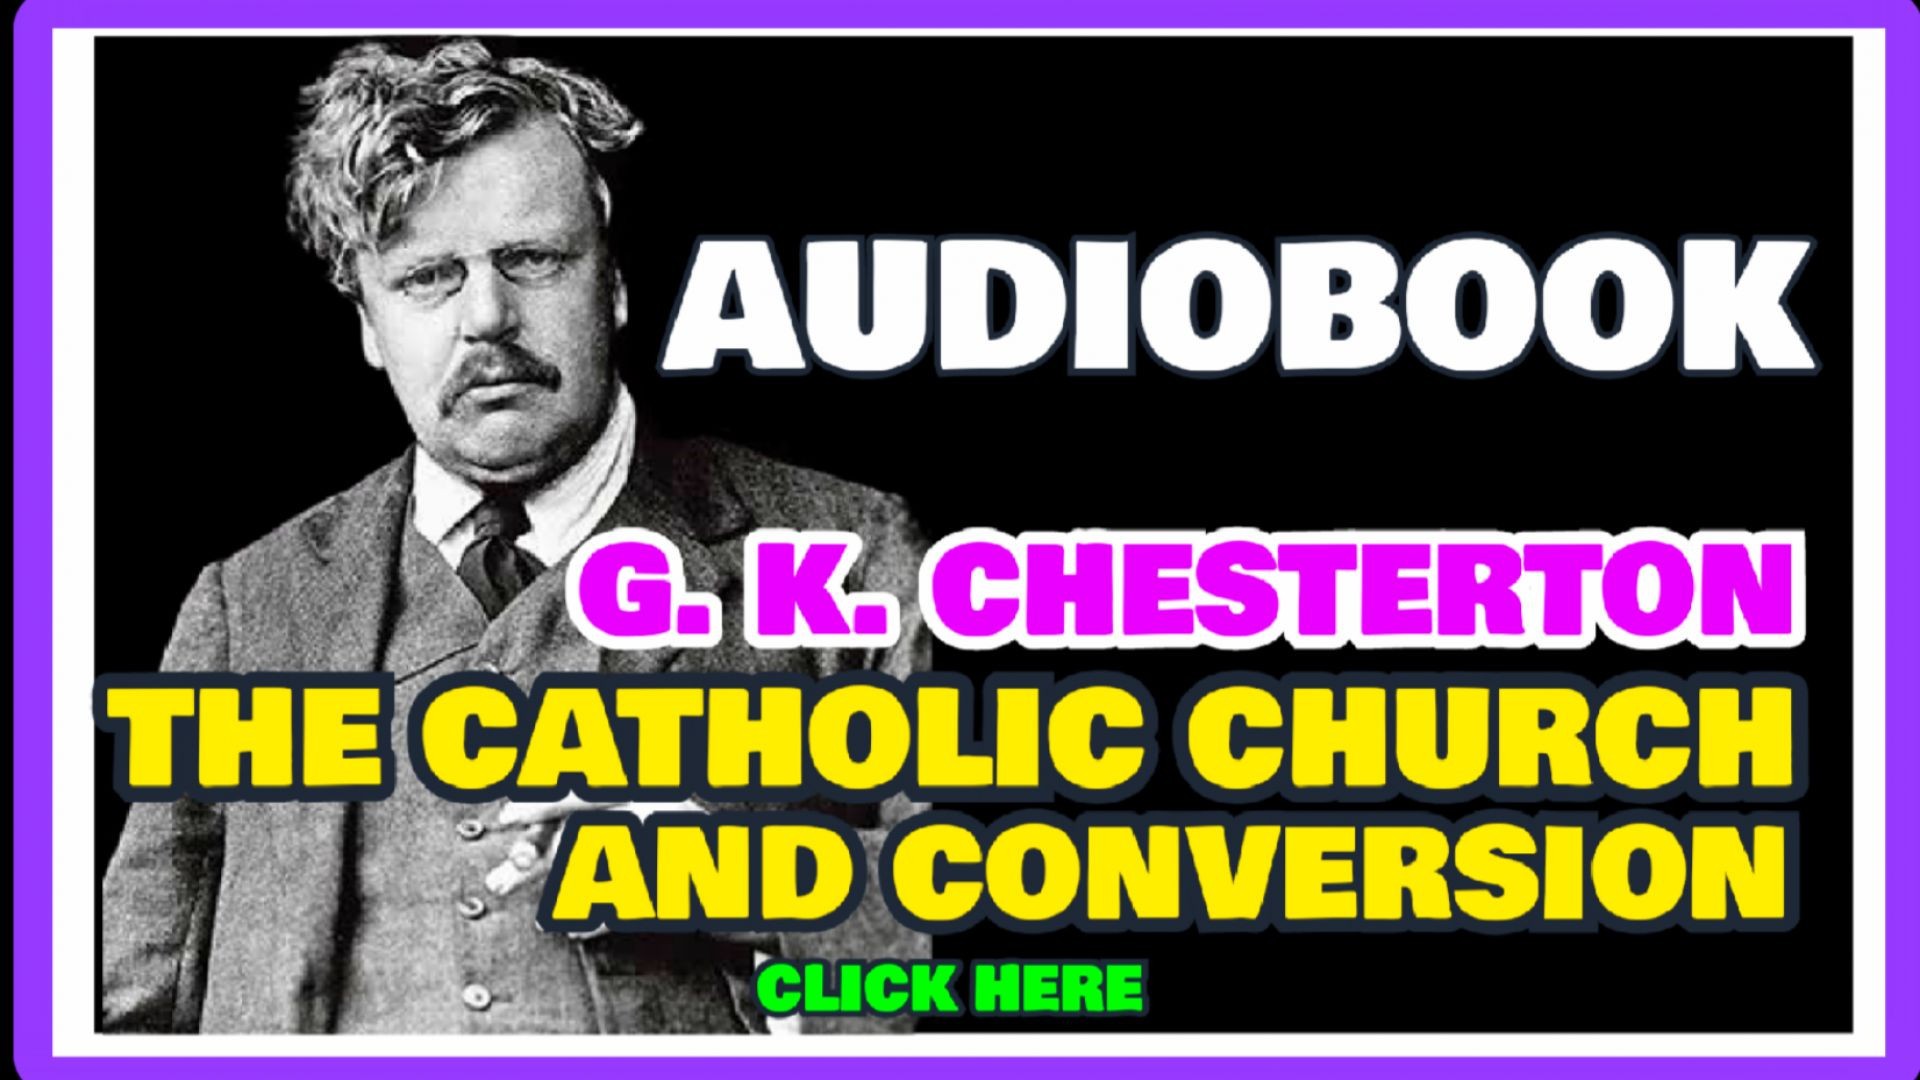 ⁣G.K. CHESTERTON AUDIOBOOK - THE CATHOLIC CHURCH AND CONVERSION